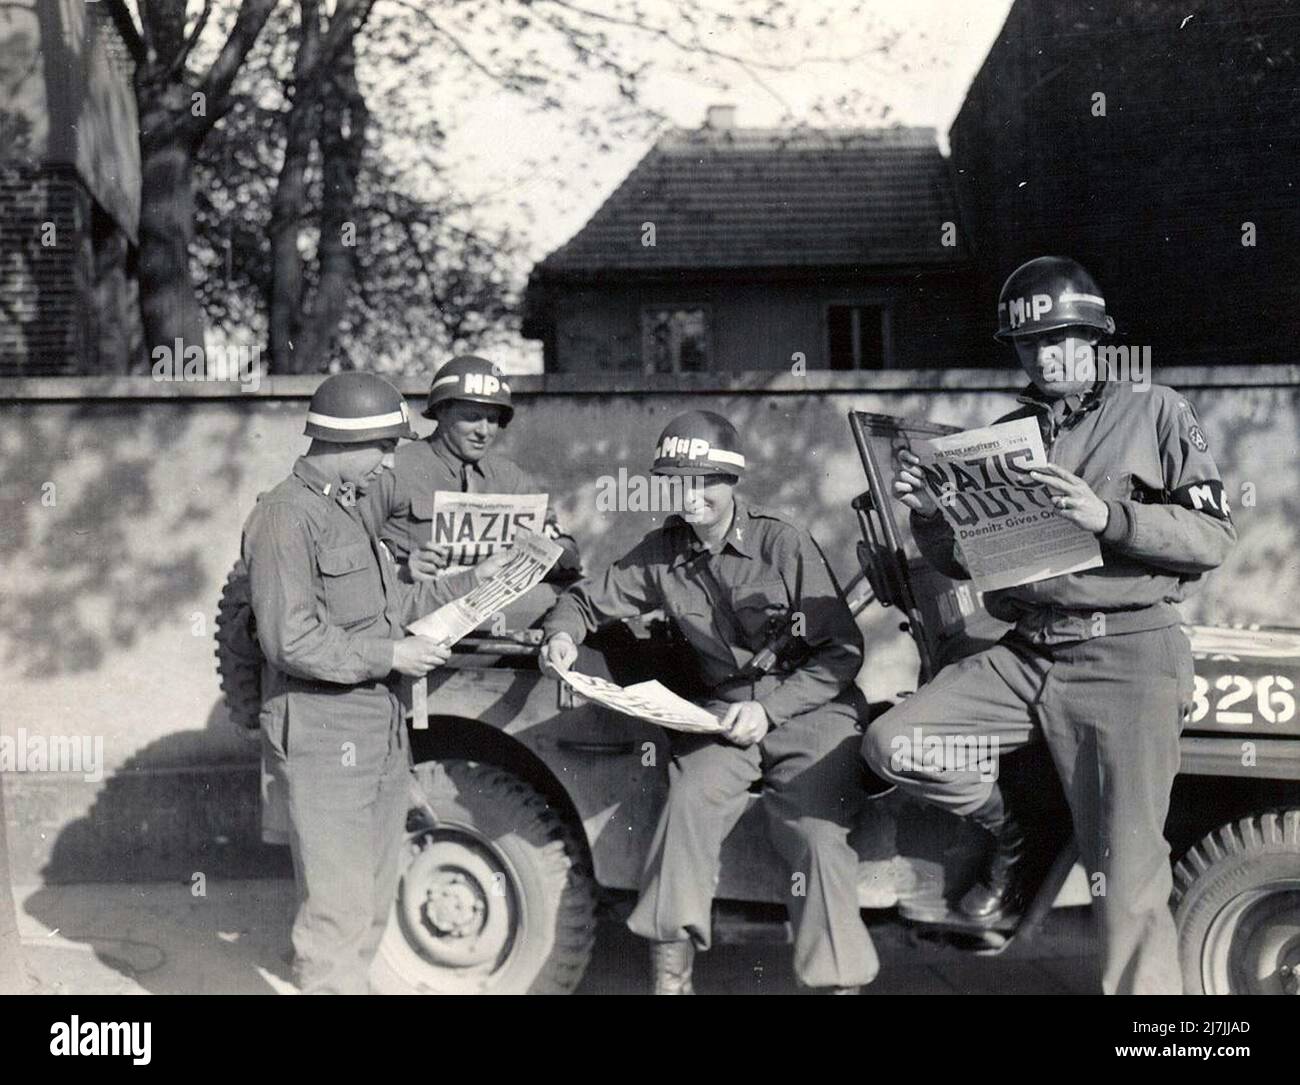 US military policemen read about the German surrender ending World War II in Europe. Stock Photo